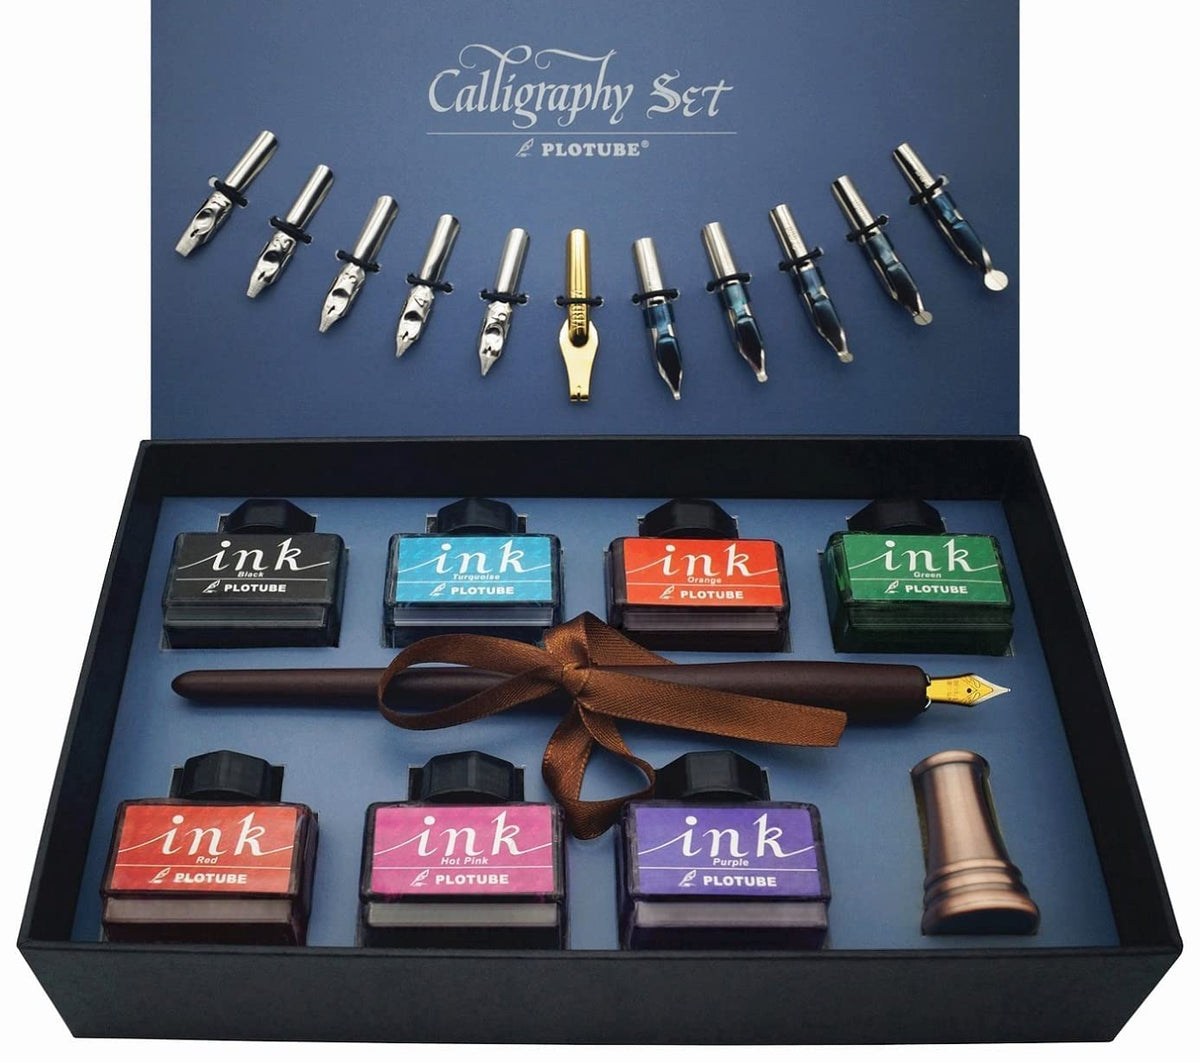 OwnColor Calligraphy Pens 20 Piece Calligraphy Set for Beginners Handcrafted Glass Dip Pen Wood Calligraphy Pen with Inks, Nibs,Holder